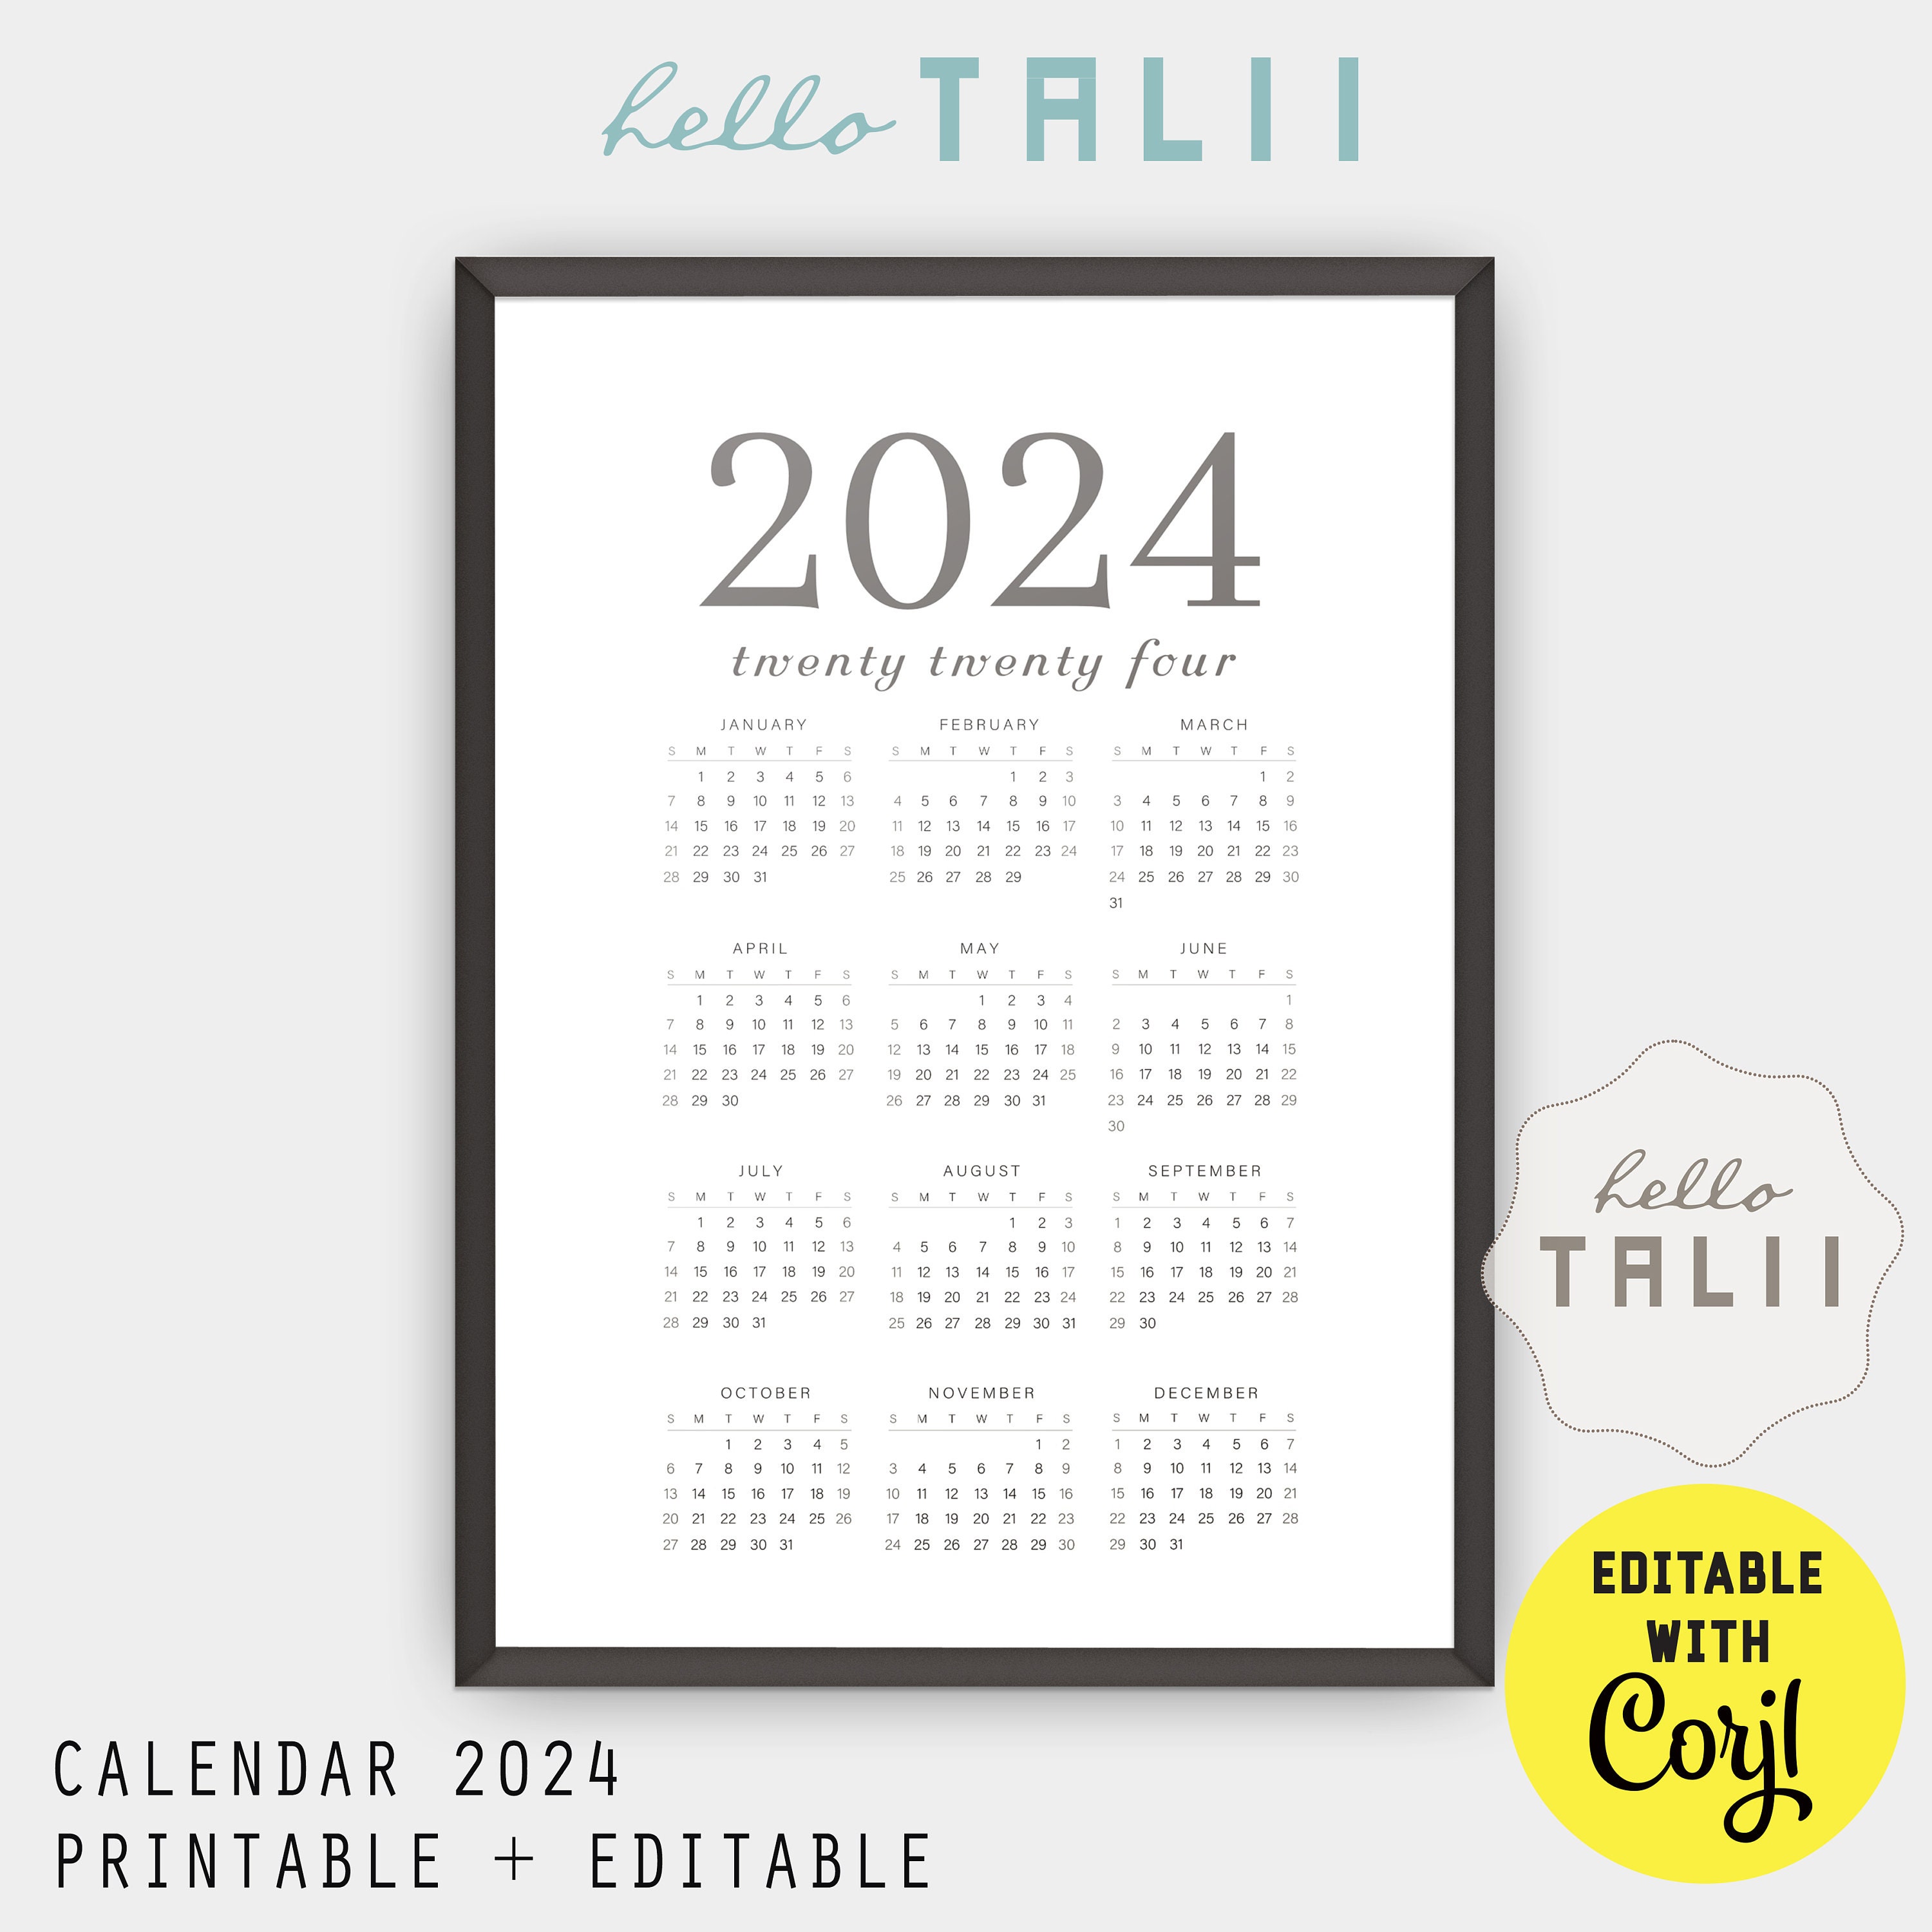 2024 Calendrier 2024 French Calendar Landscape 2024 Yearly 